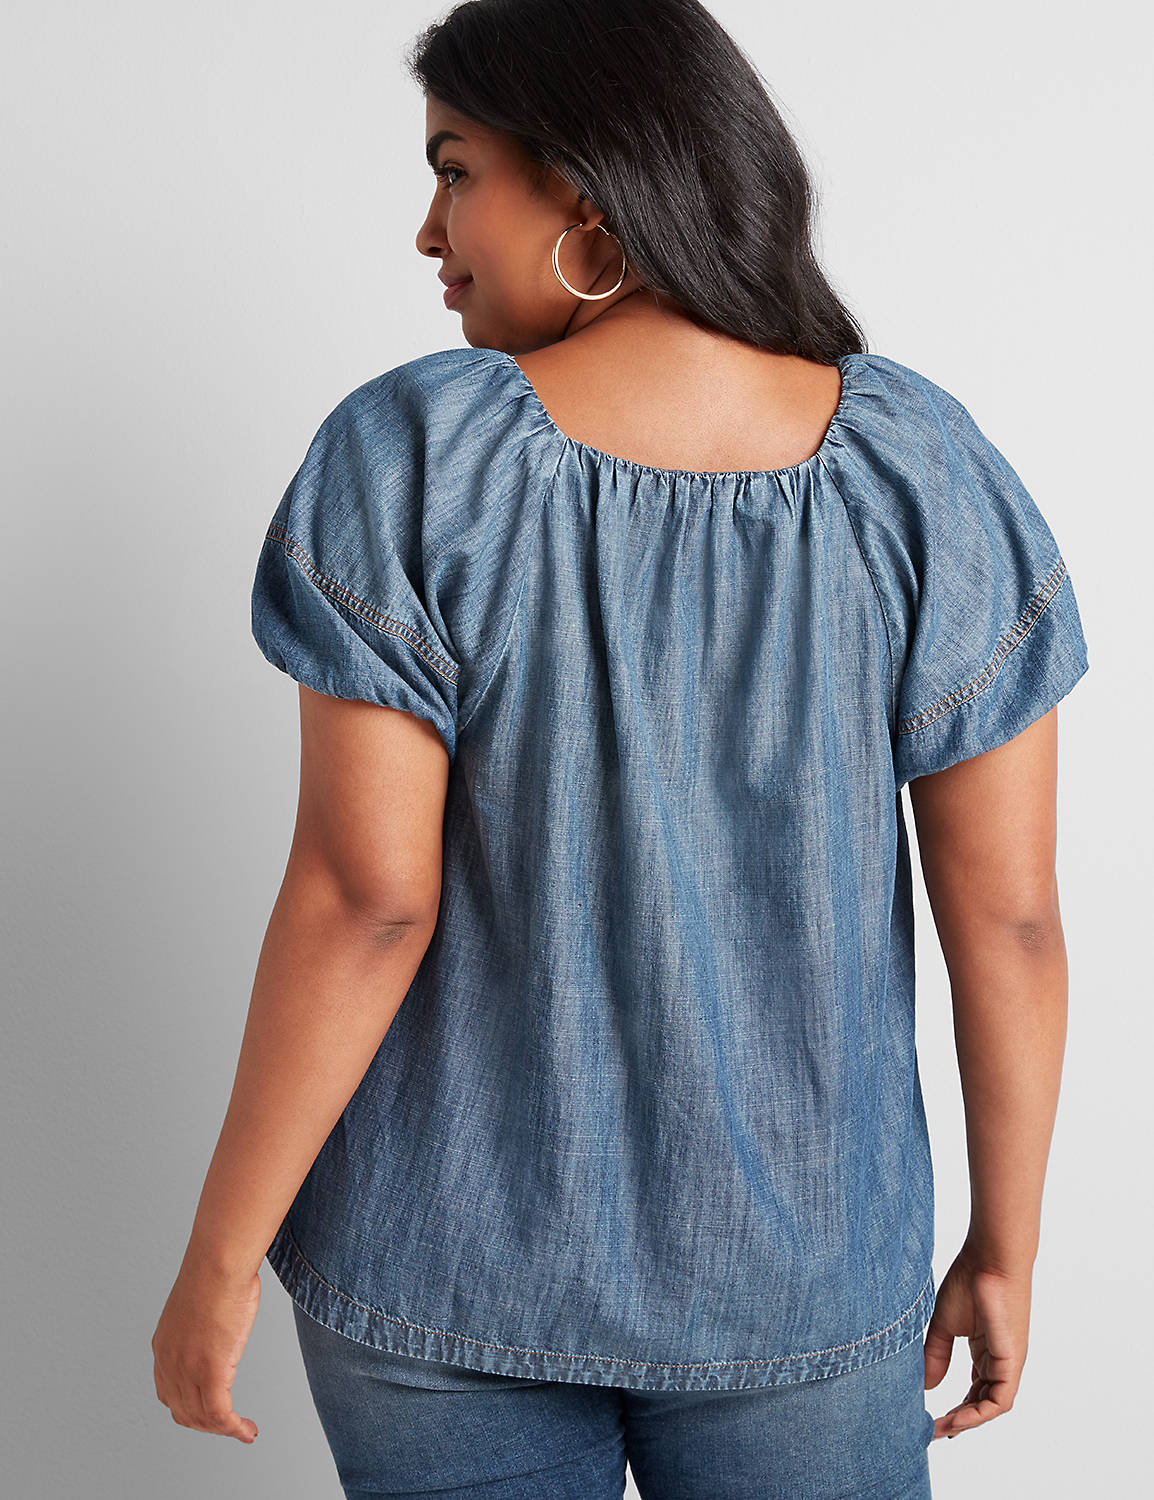 Short Sleeve Square Neck Popover Chambray Top 1114556:Denim Chambray:12 Product Image 2